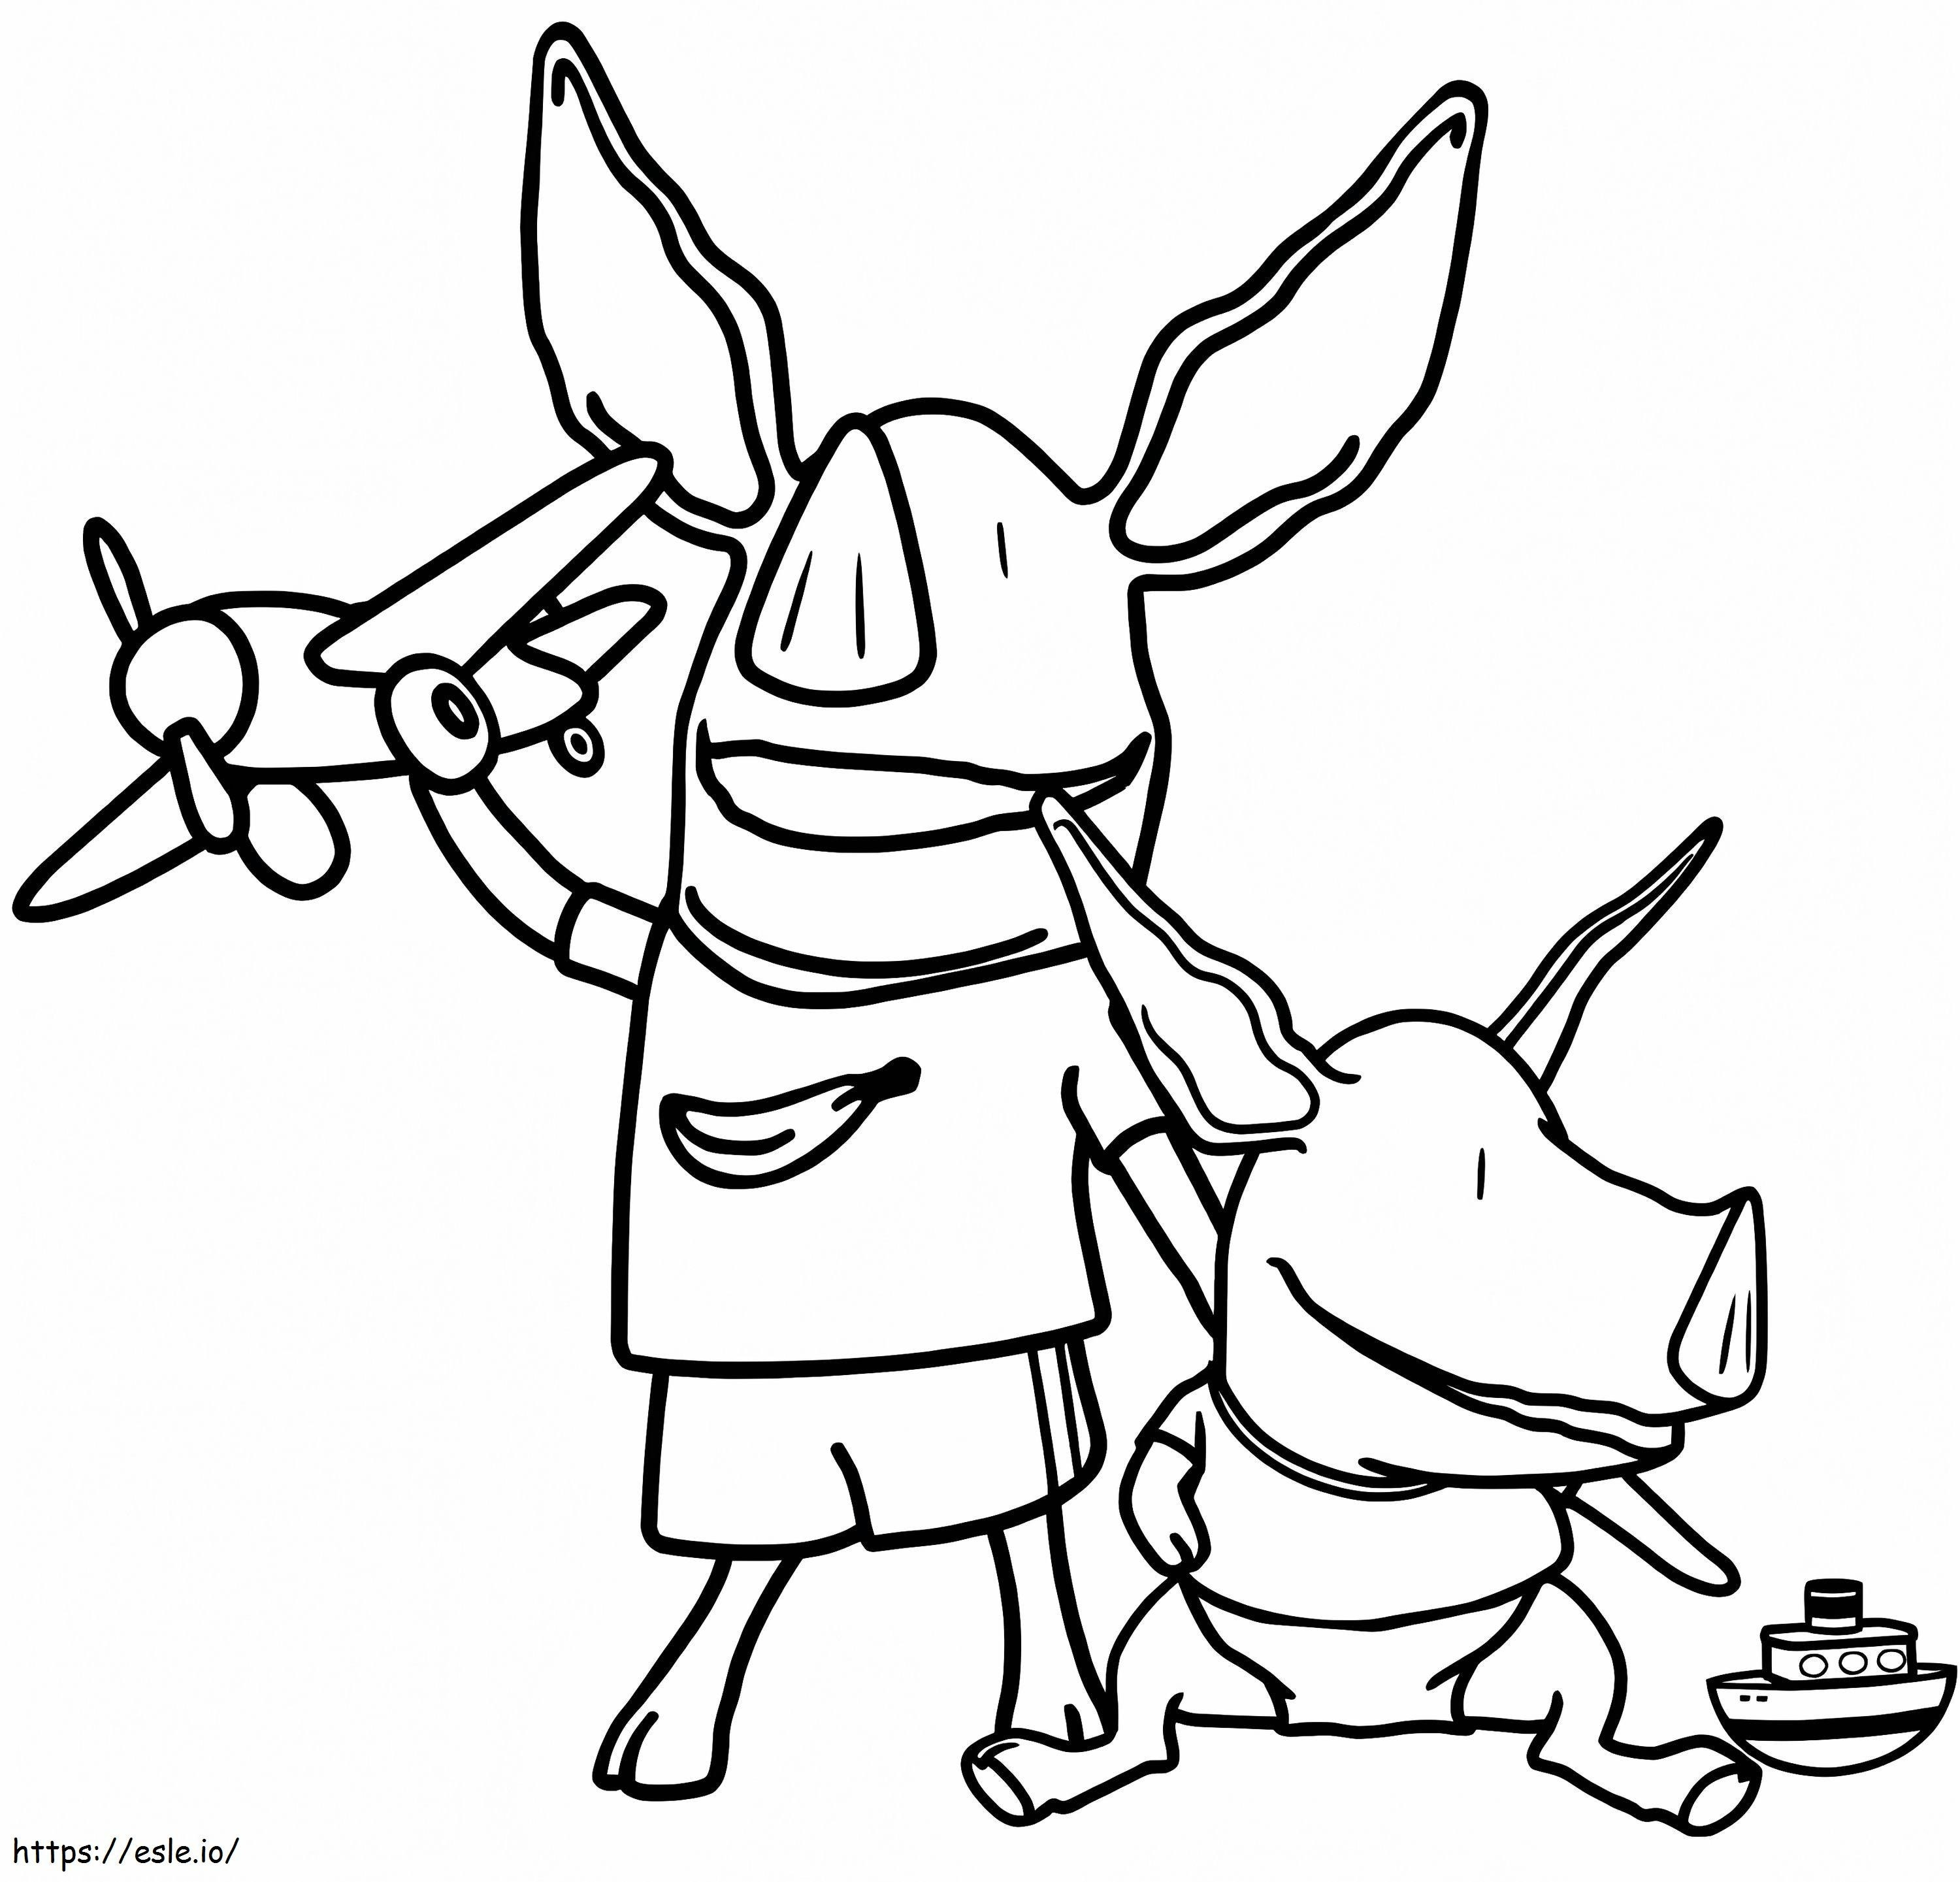 Olivias Brothers William And Ian coloring page